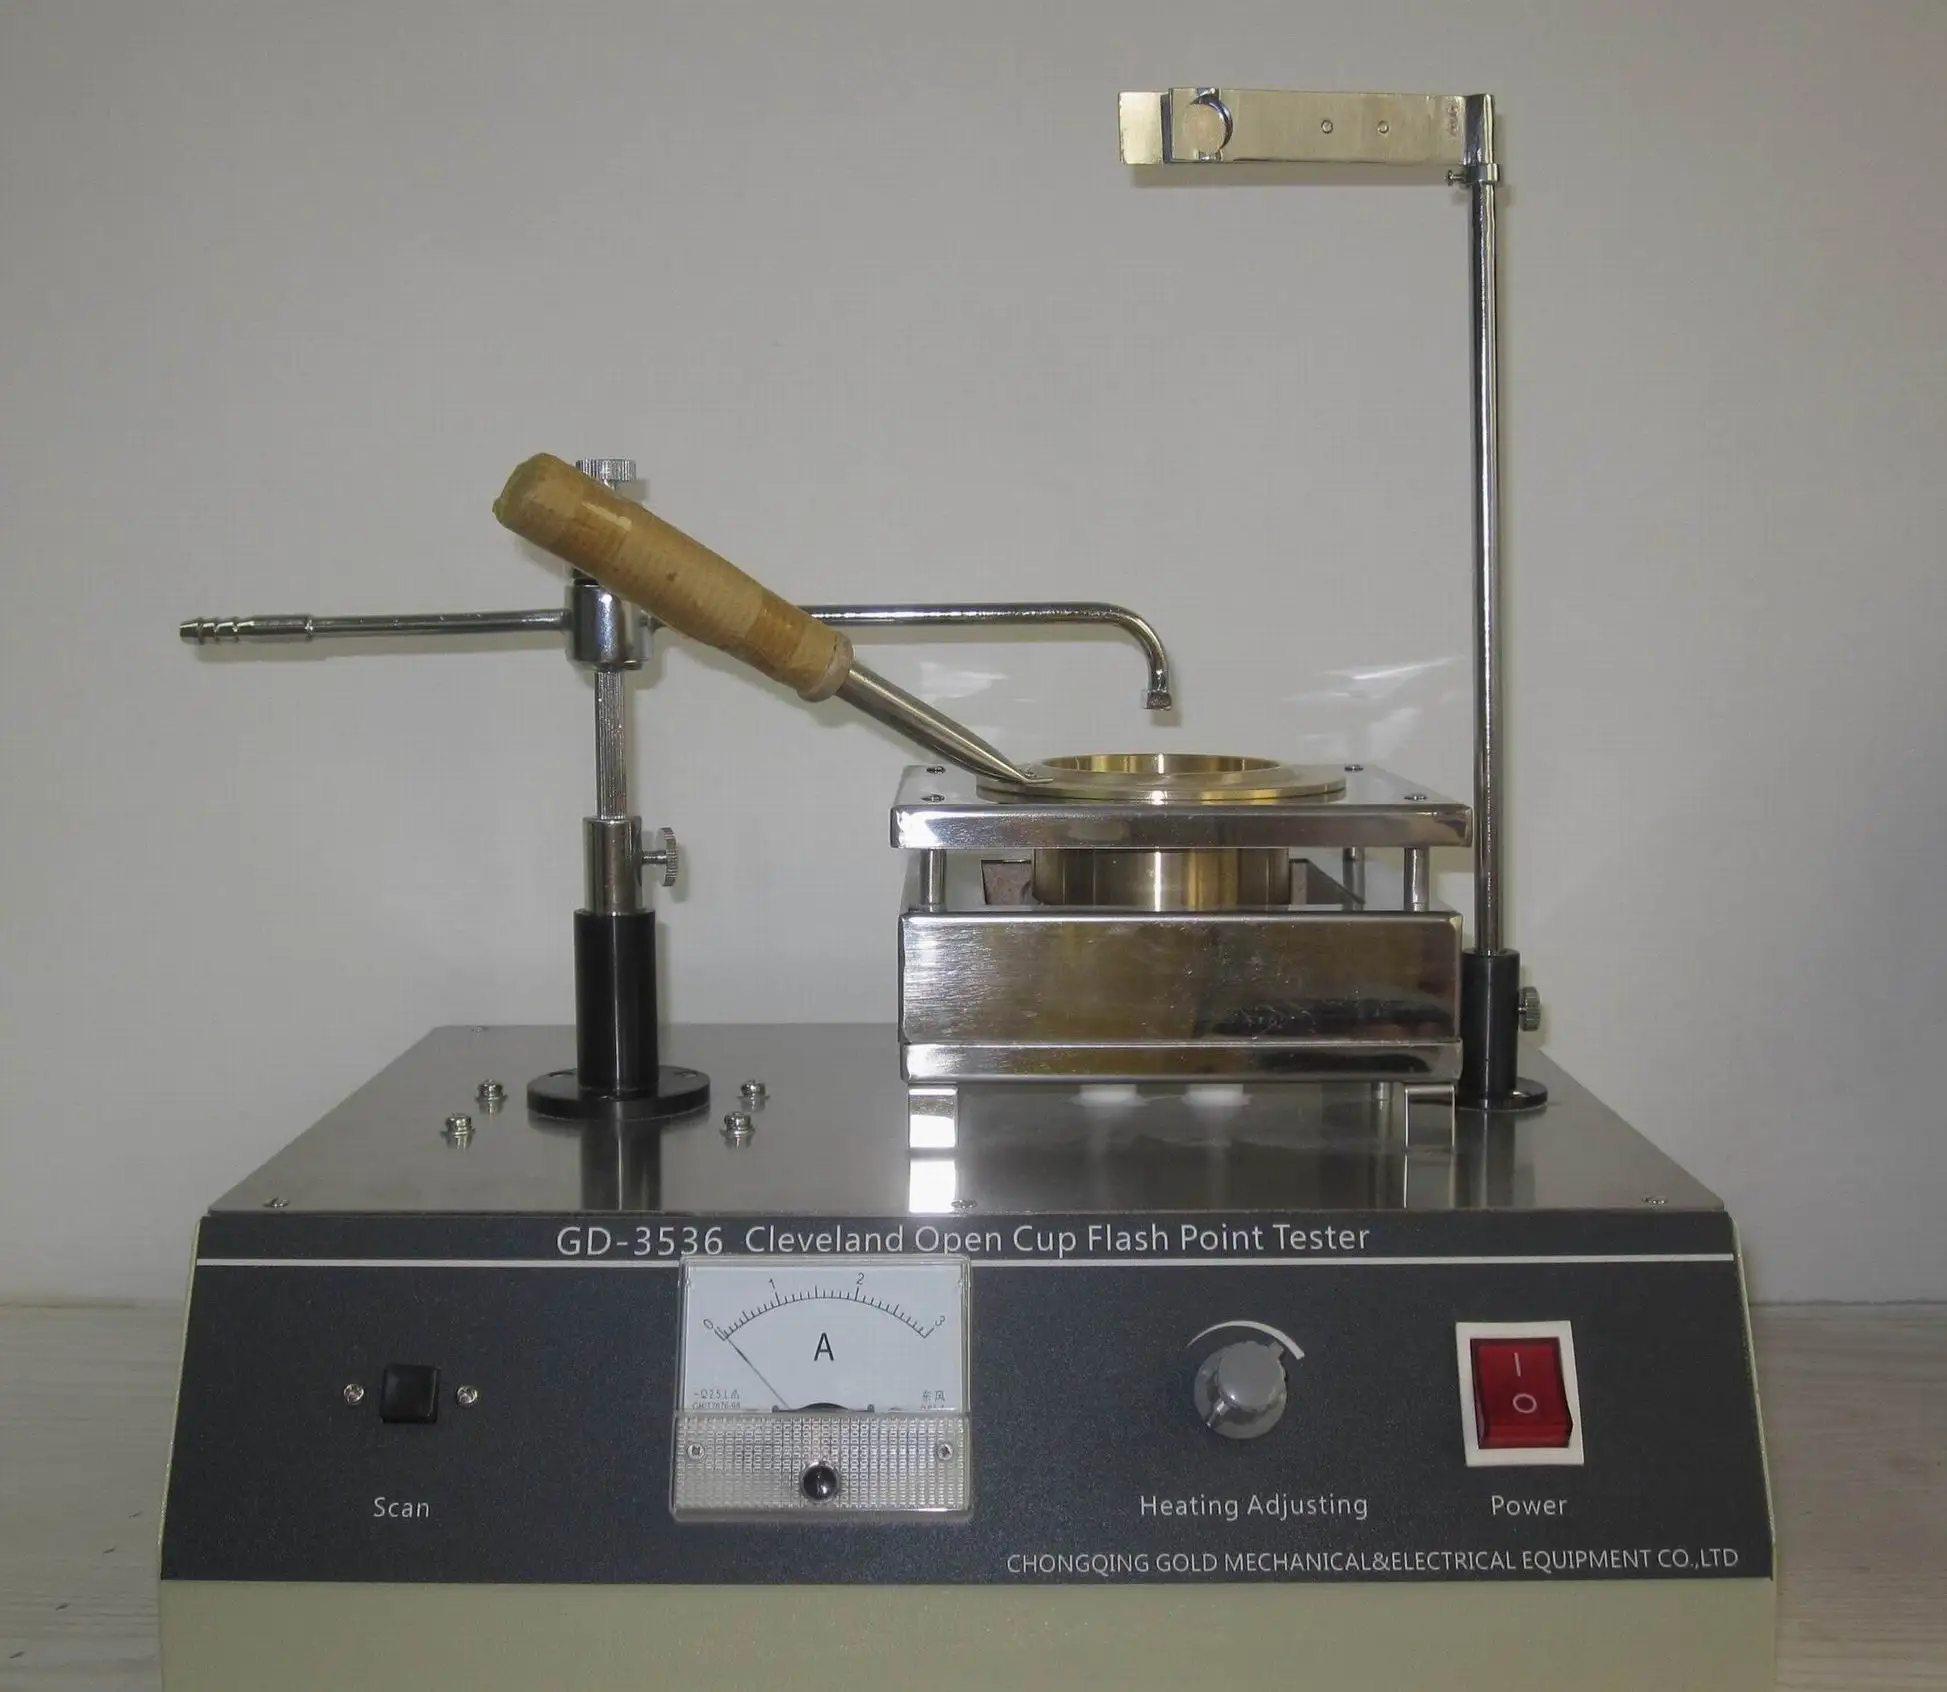 Flash Point Tester Cleveland Open Cup for Petroleum Products ASTM D92